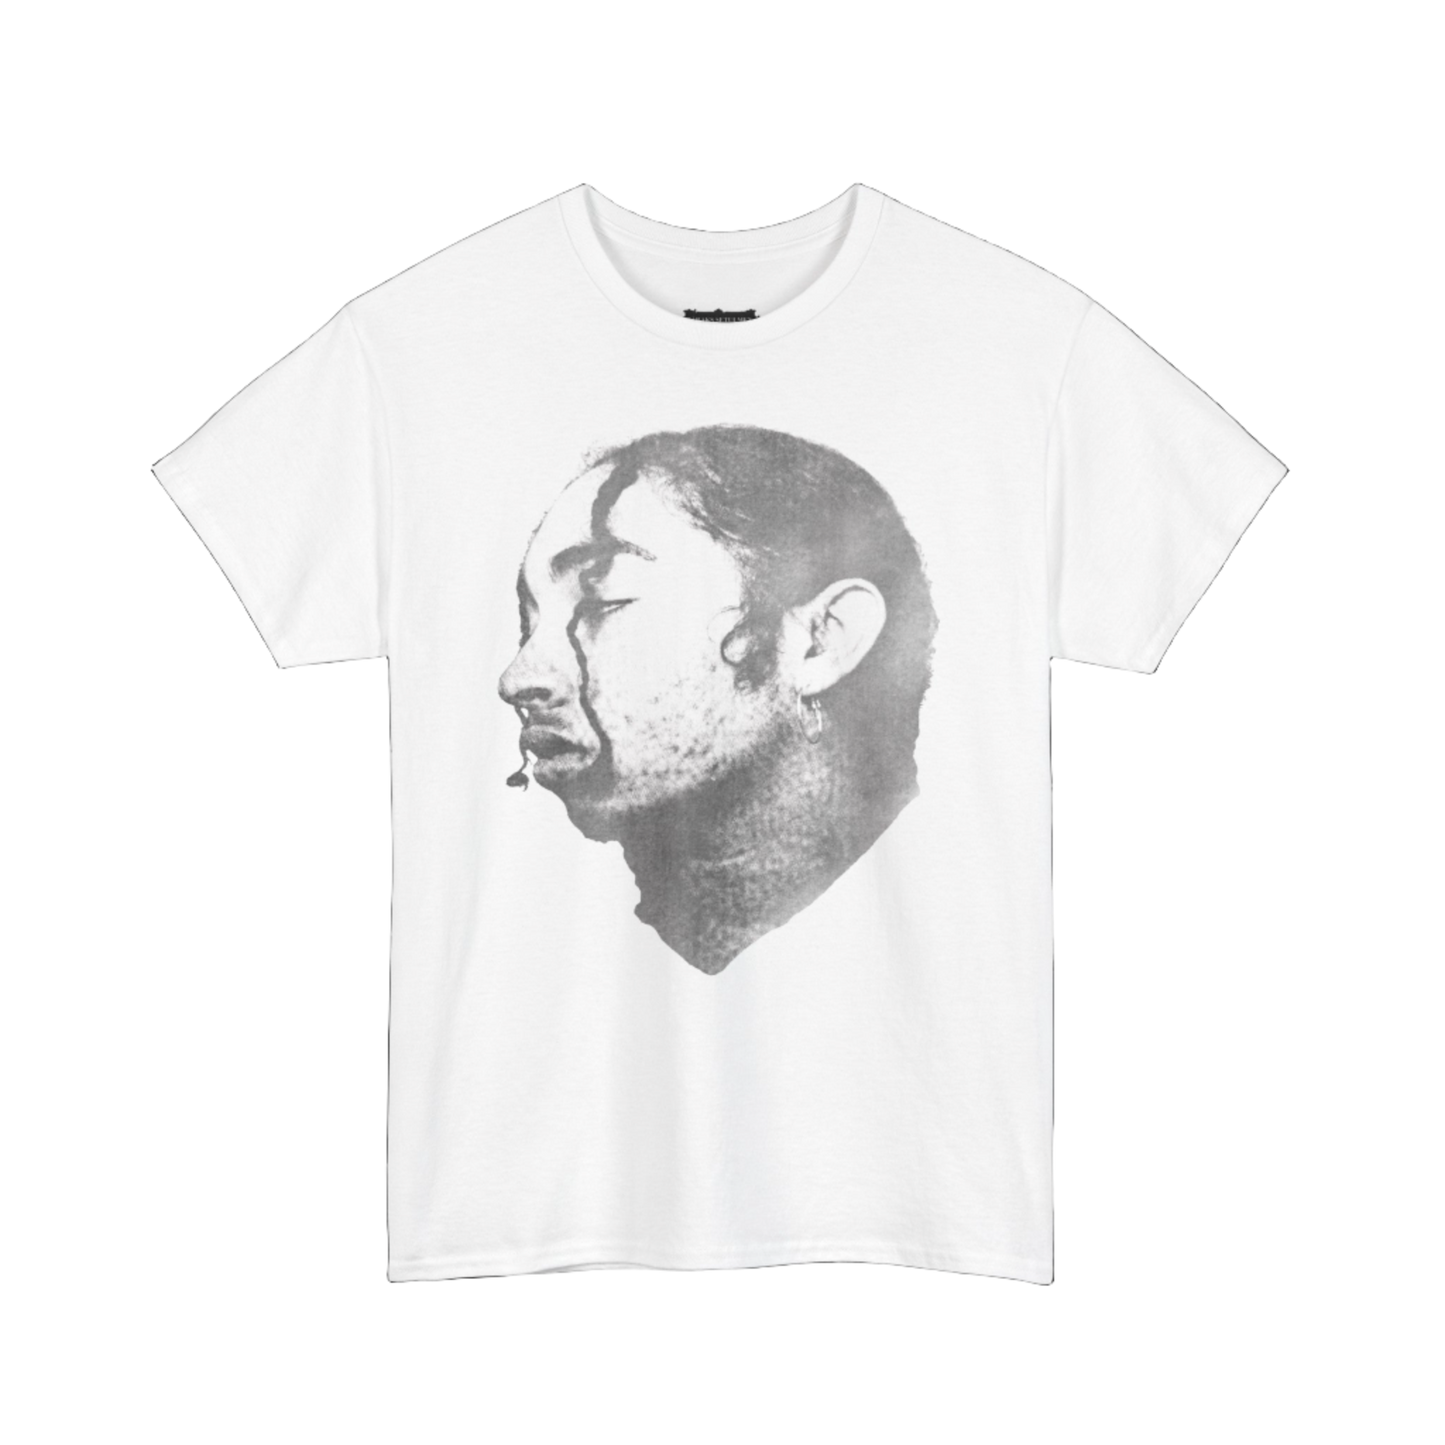 White tee w/ graphic of B. Set's face